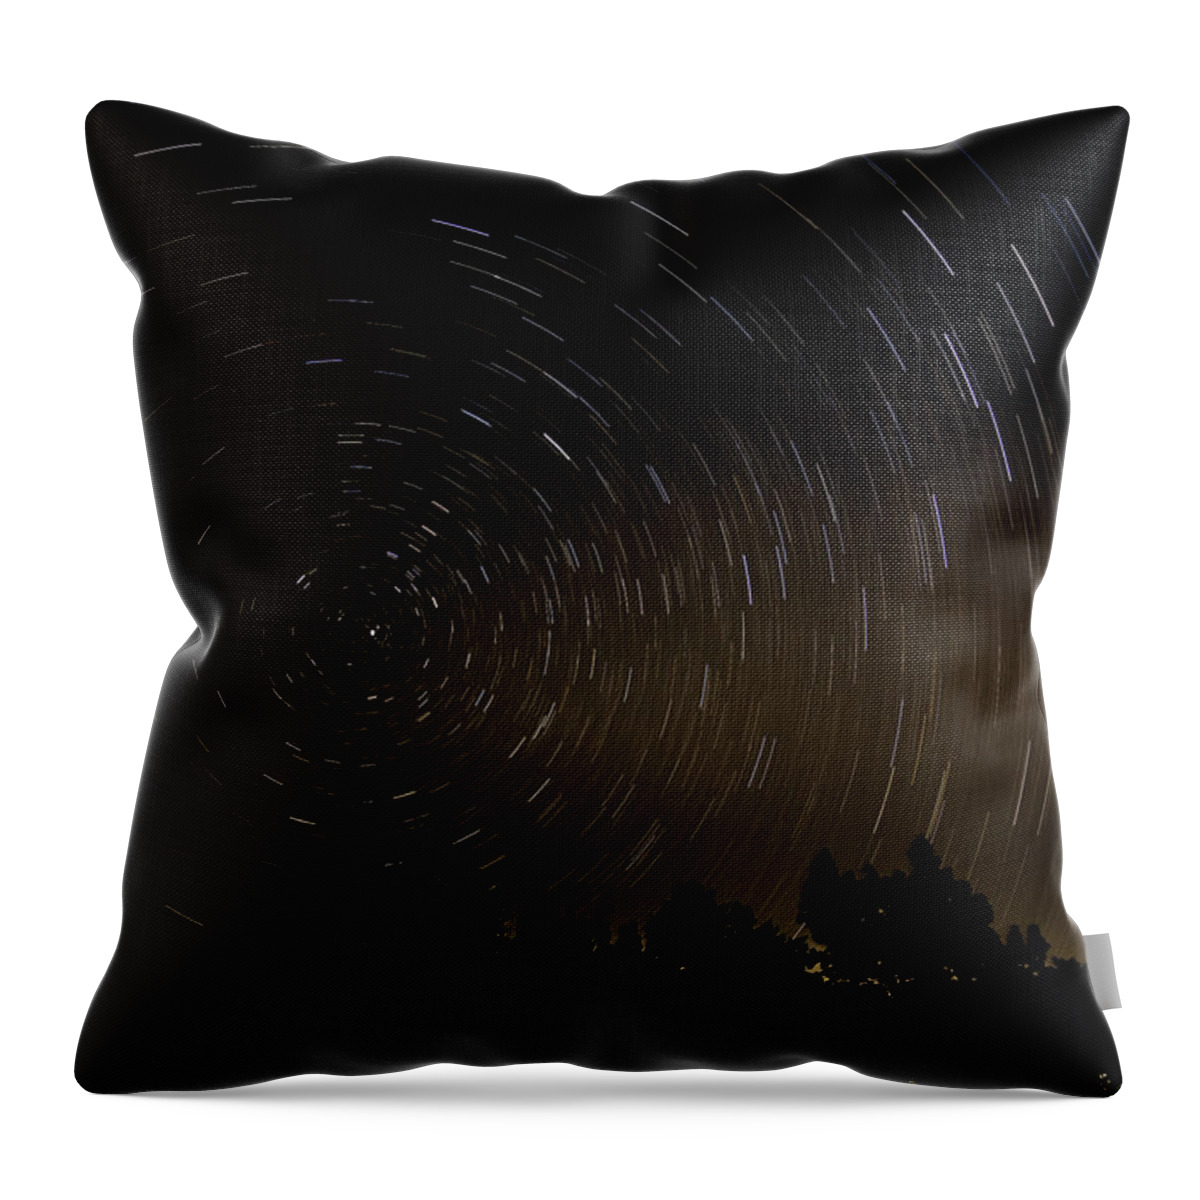 Astronomy Throw Pillow featuring the photograph Texas Star Trails by Ross Henton